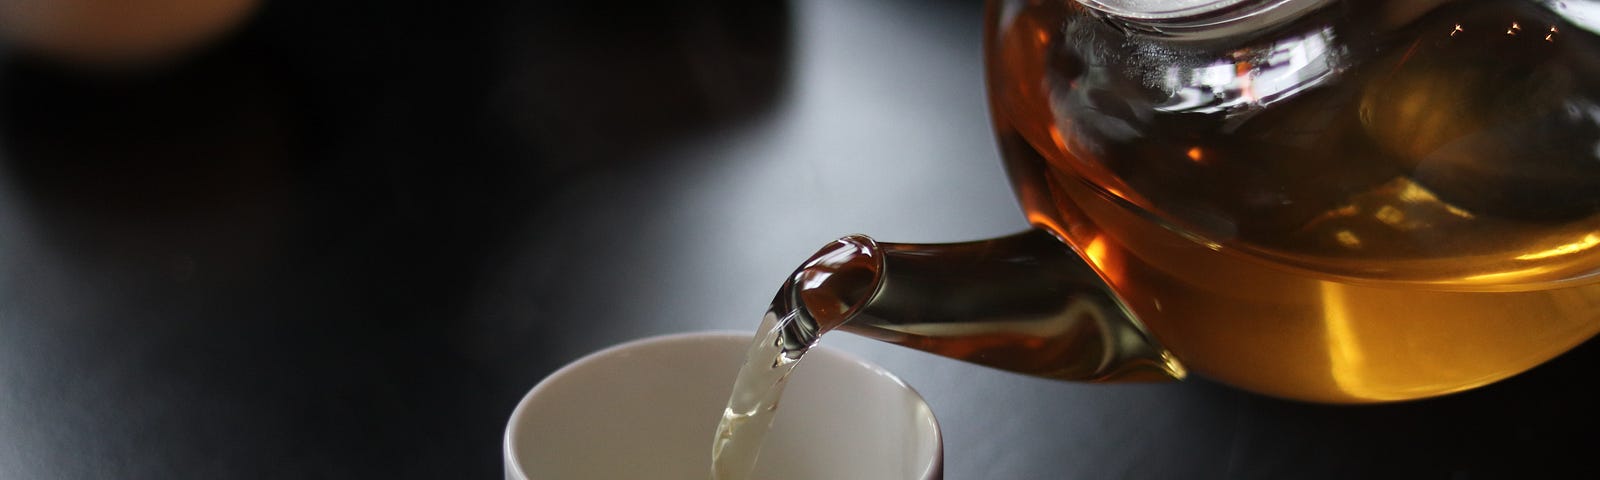 tea being poured into a cup from a teapot